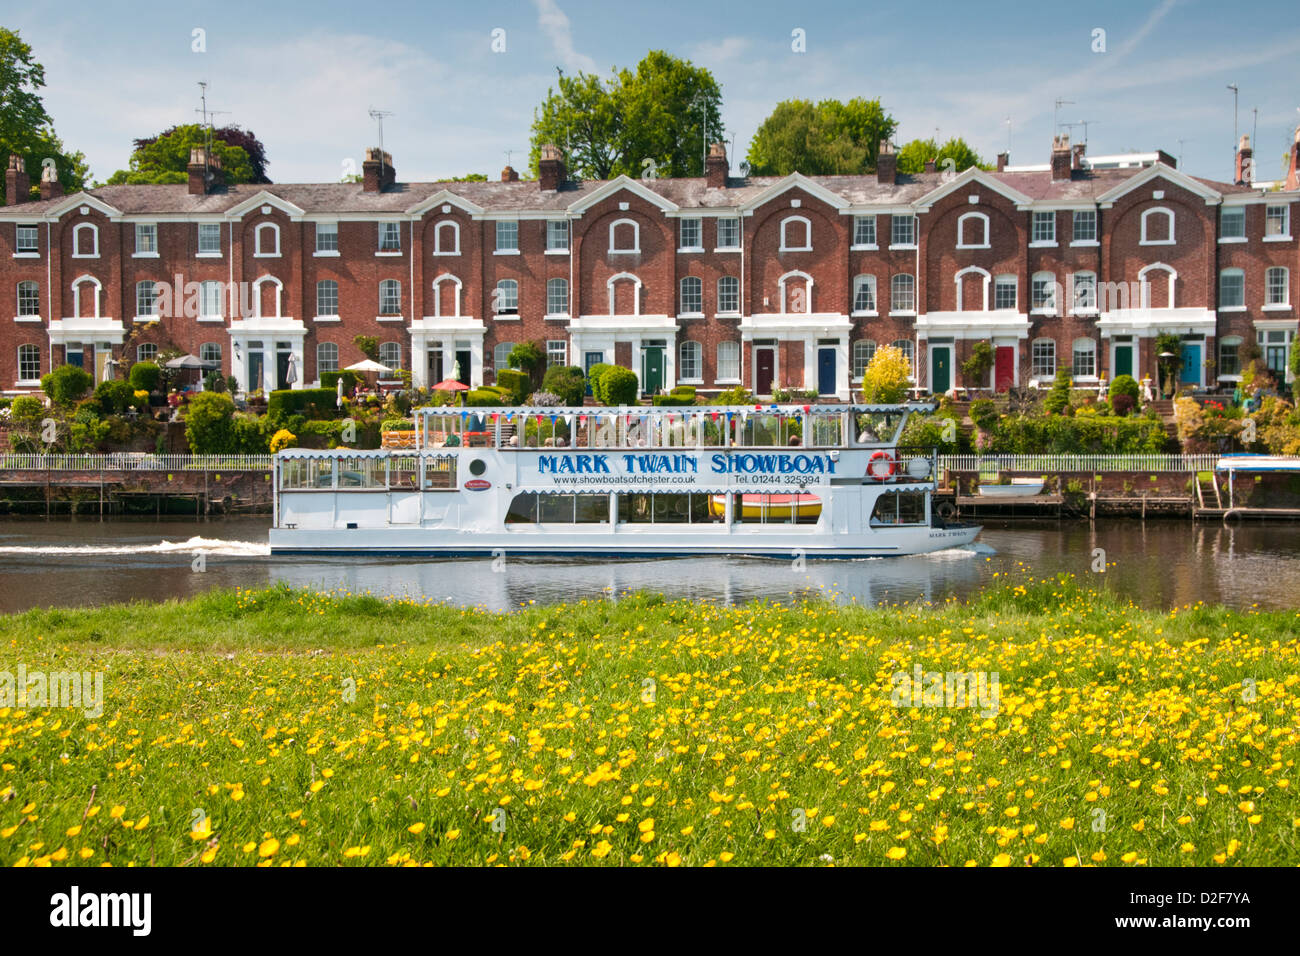 Mark Twain Tourboat on The River Dee in Spring from The Meadows, Chester, Cheshire, England, UK Stock Photo